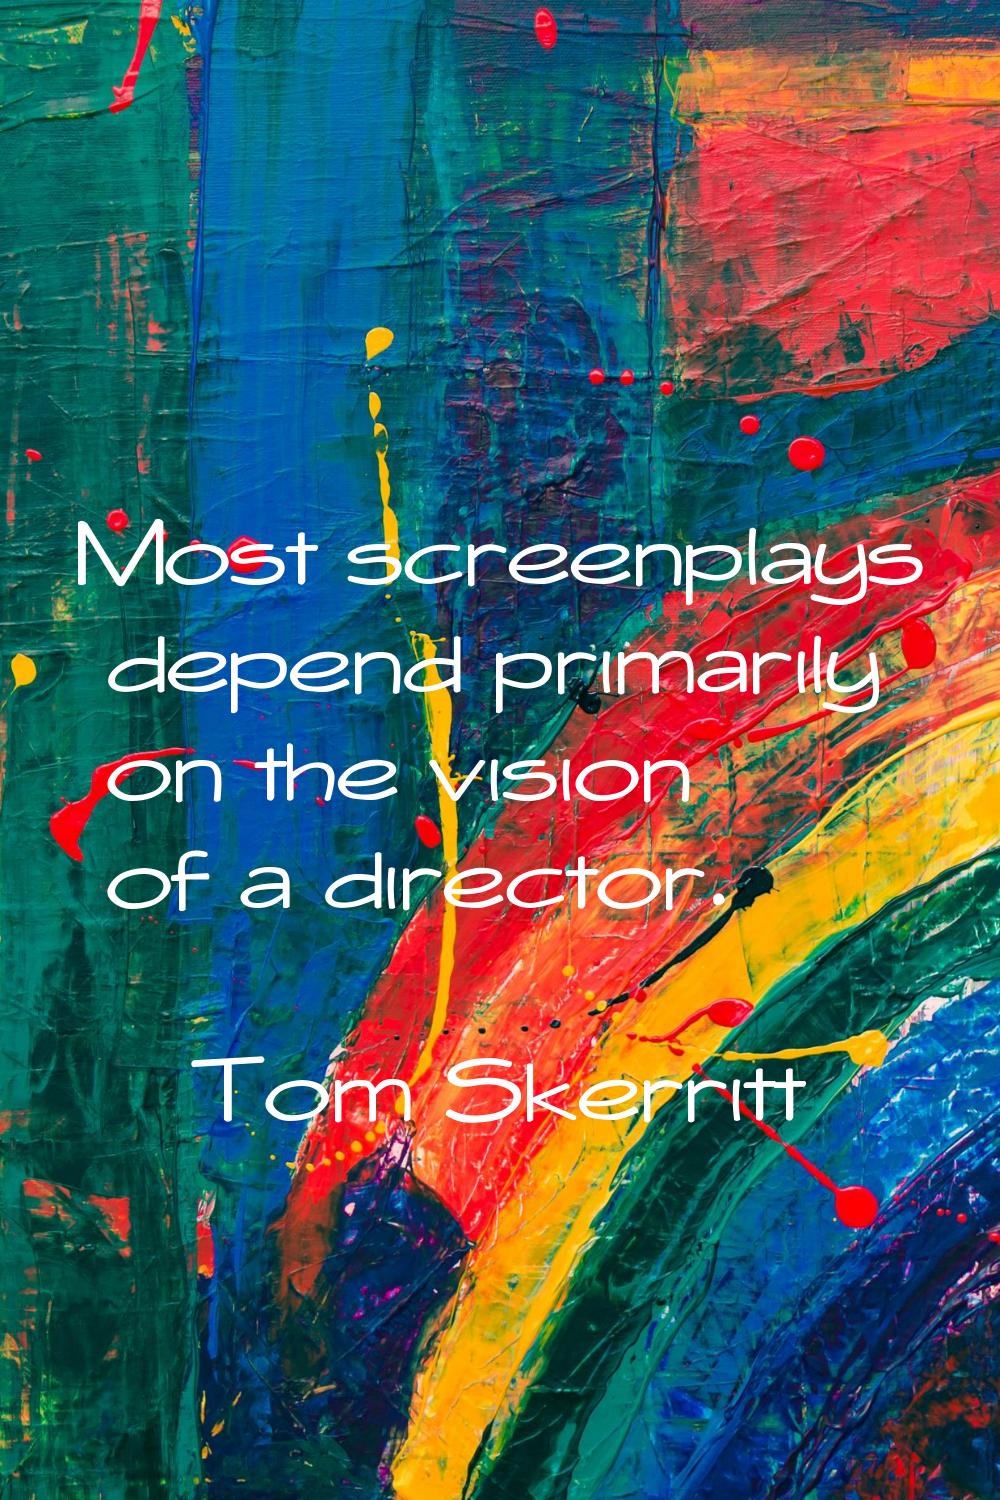 Most screenplays depend primarily on the vision of a director.